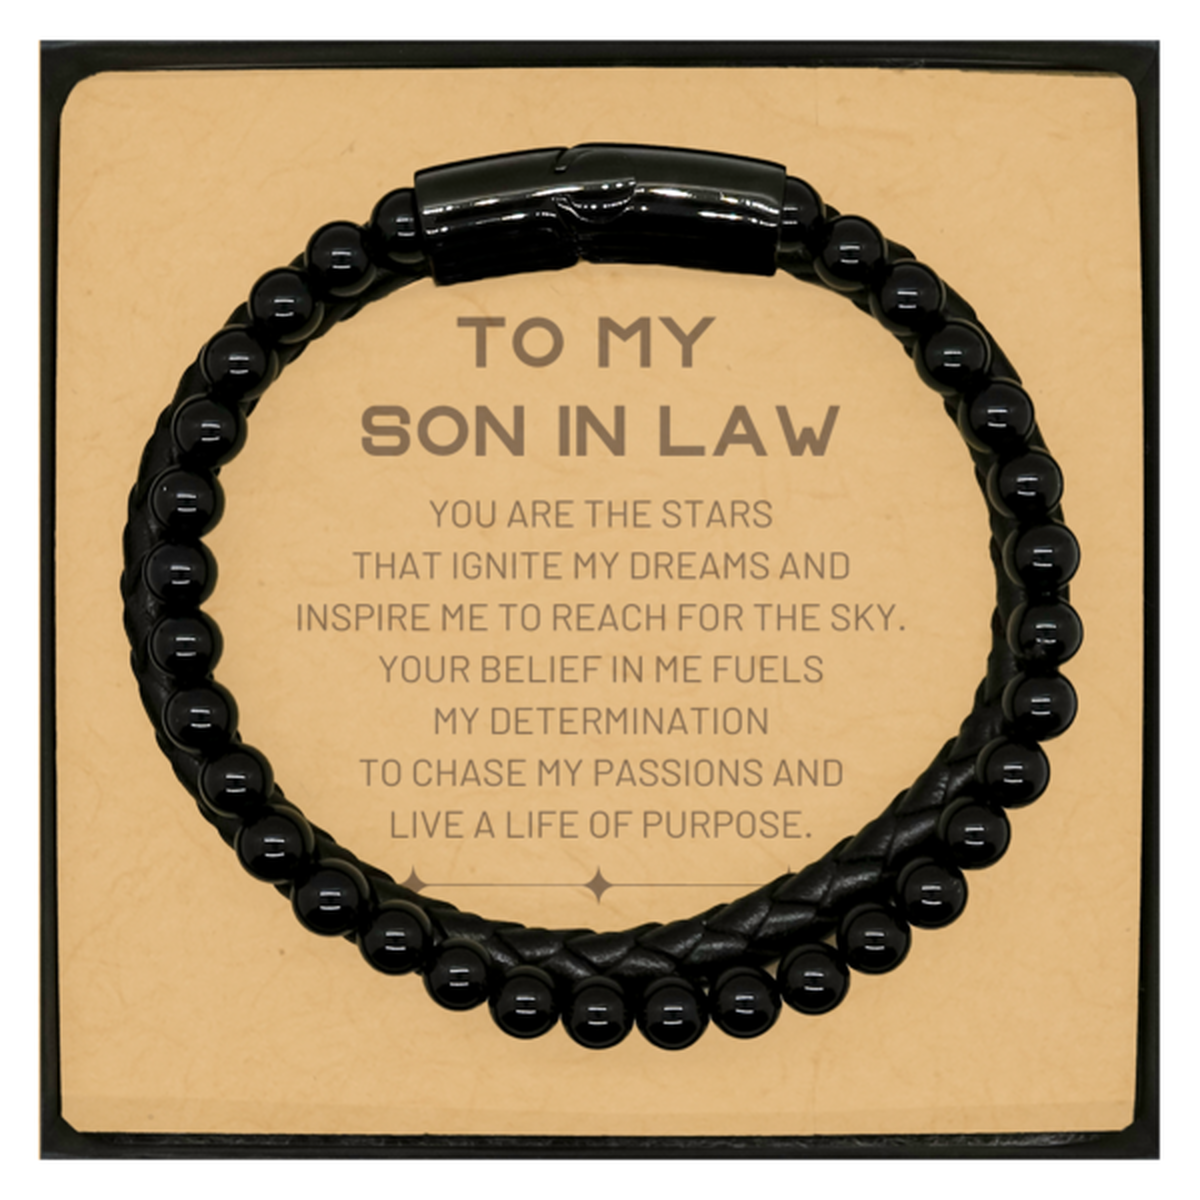 To My Son In Law Stone Leather Bracelets, You are the stars that ignite my dreams and inspire me to reach for the sky, Birthday Christmas Unique Gifts For Son In Law, Thank You Gifts For Son In Law